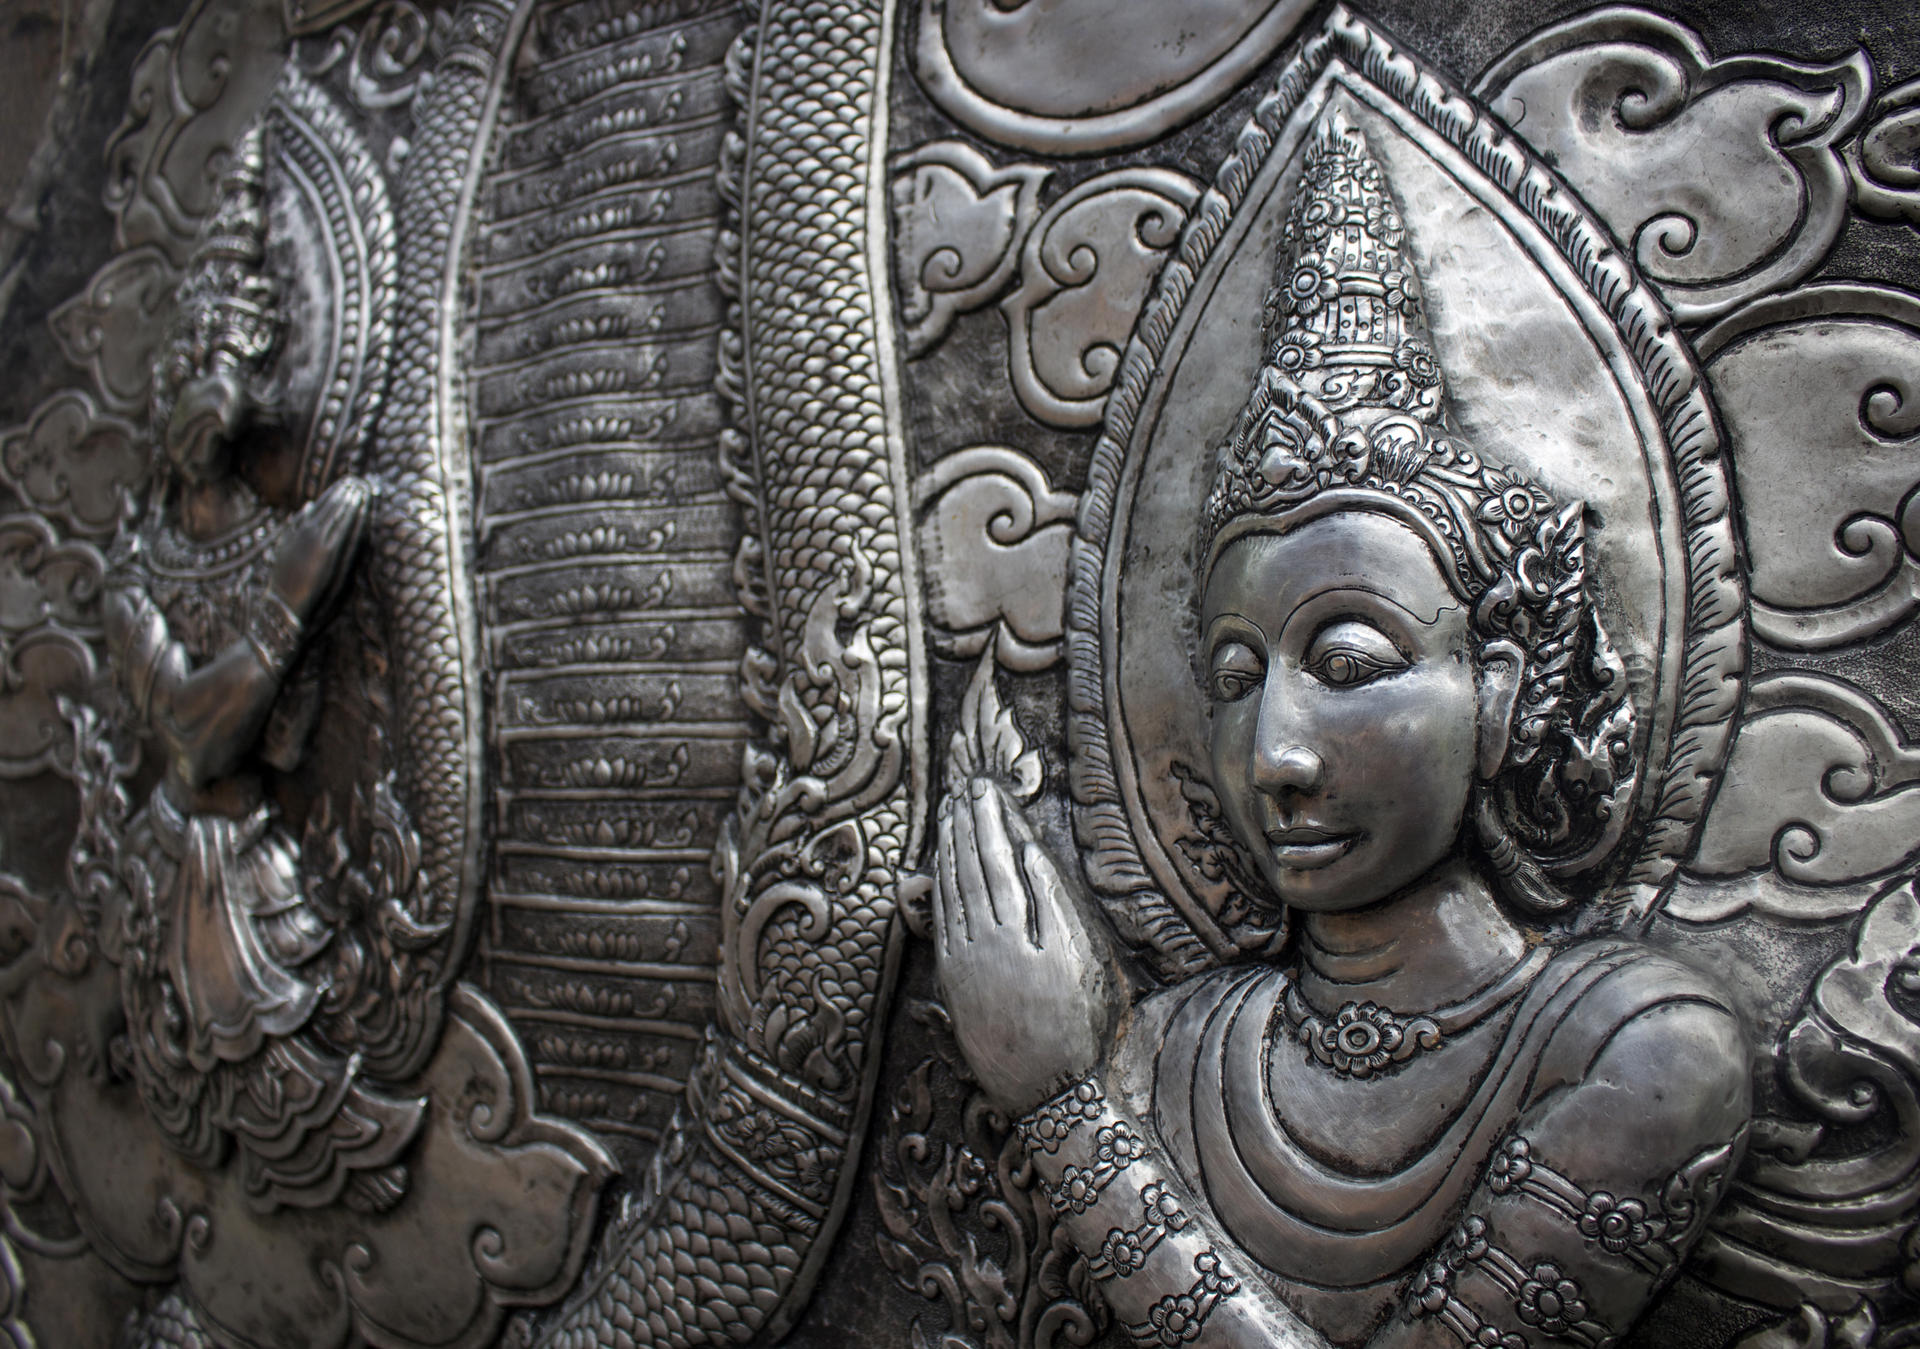 Silver lining: intricate designs at Wat Srisuphan. Photos: Narina Exelby